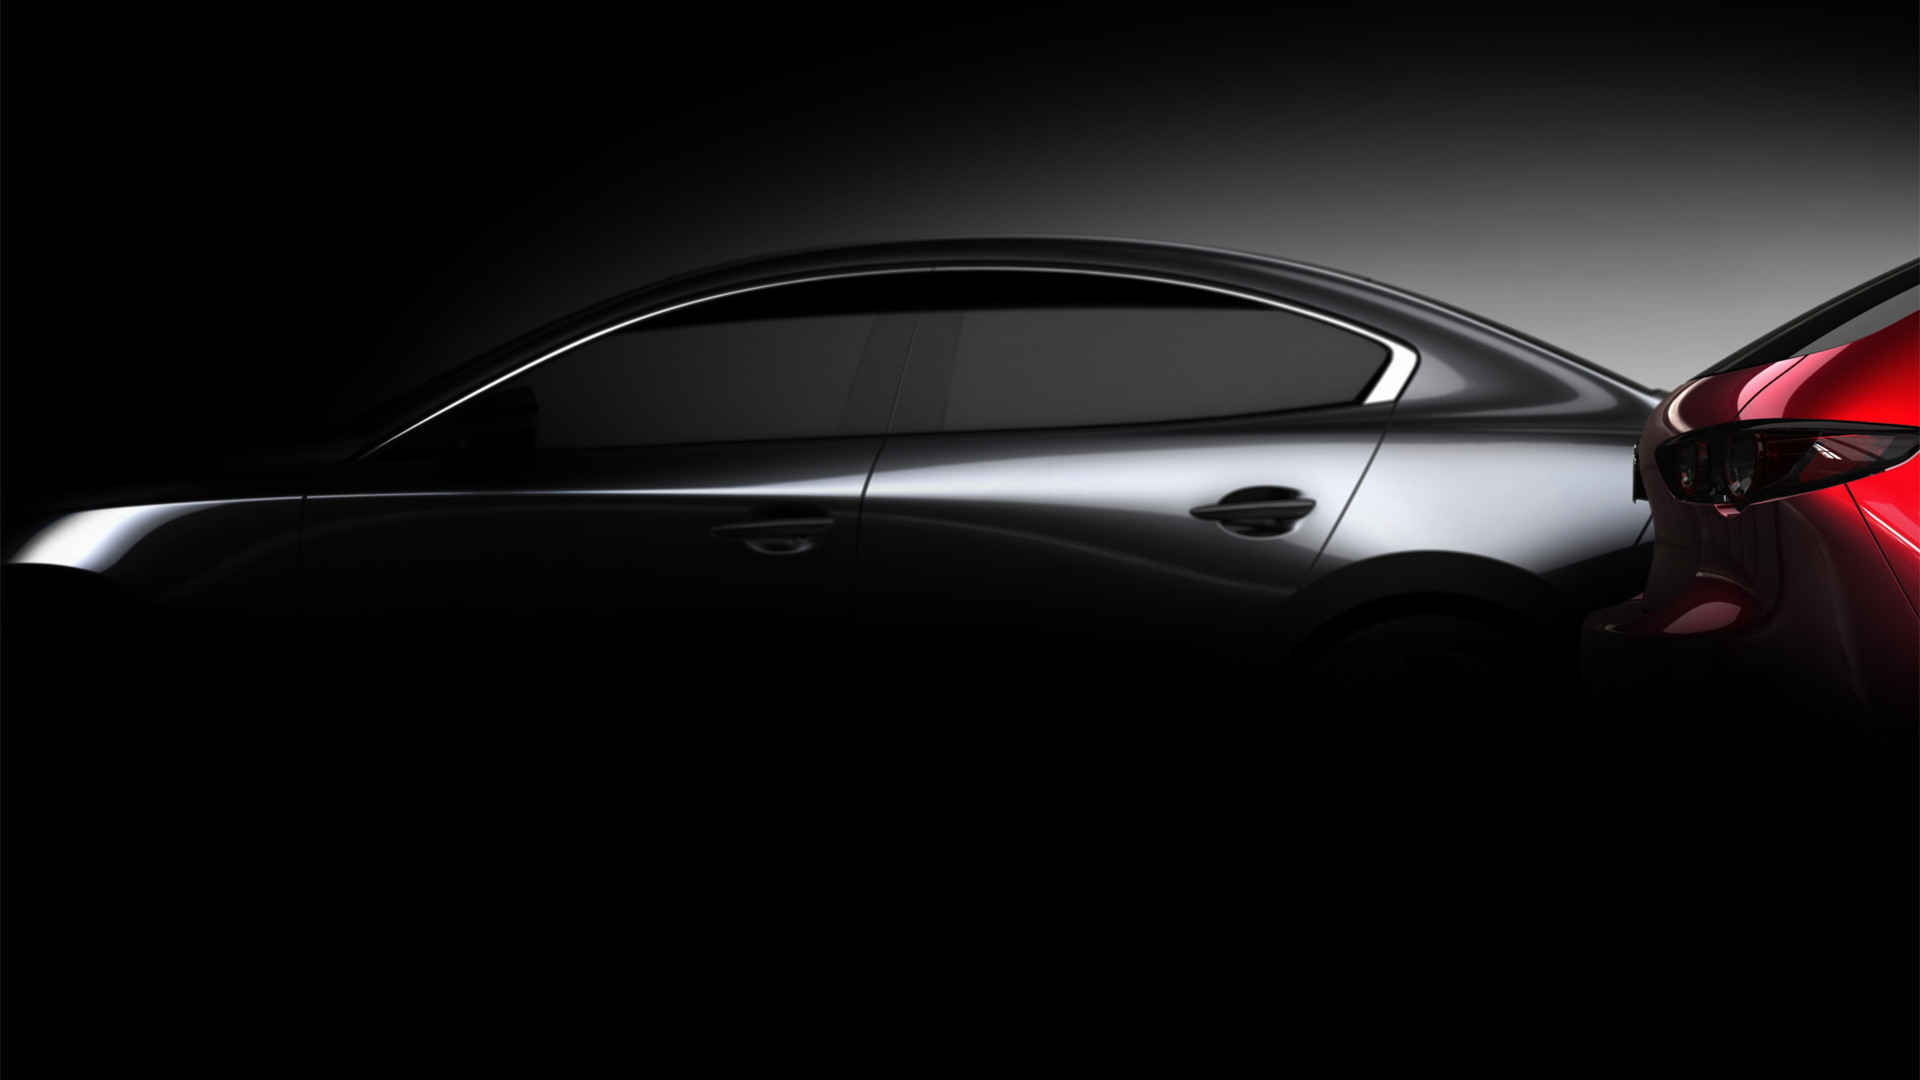 Teaser for next-gen Mazda 3 debuting at 2018 Los Angeles auto show